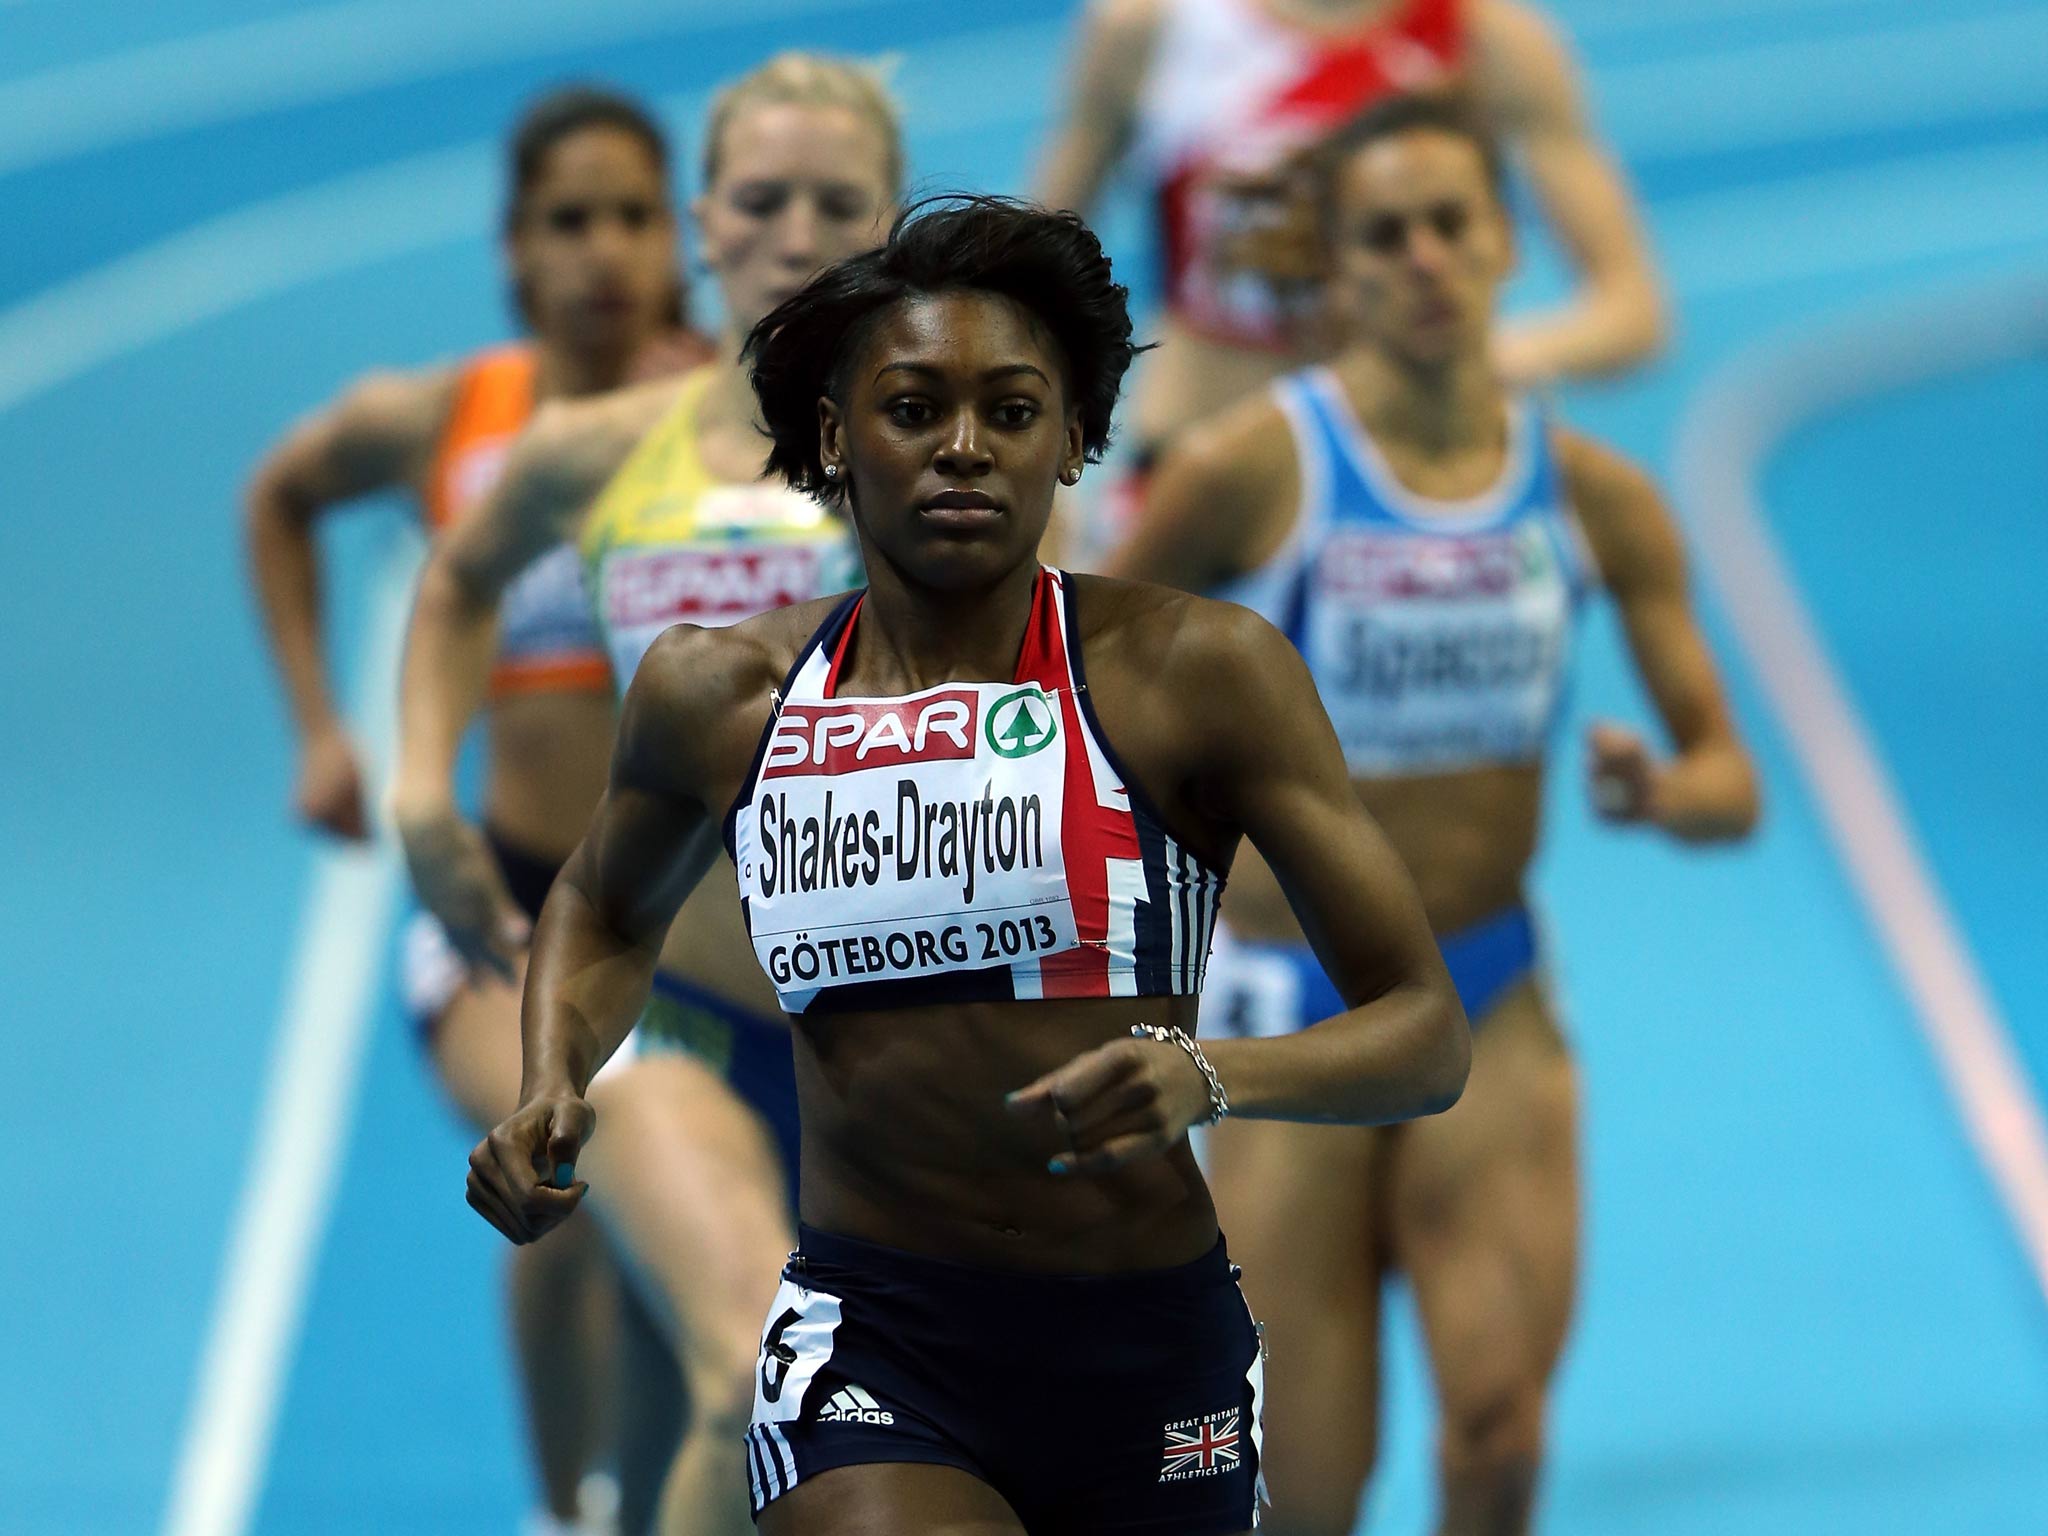 Perri Shakes-Drayton in action at the European Indoor Championships